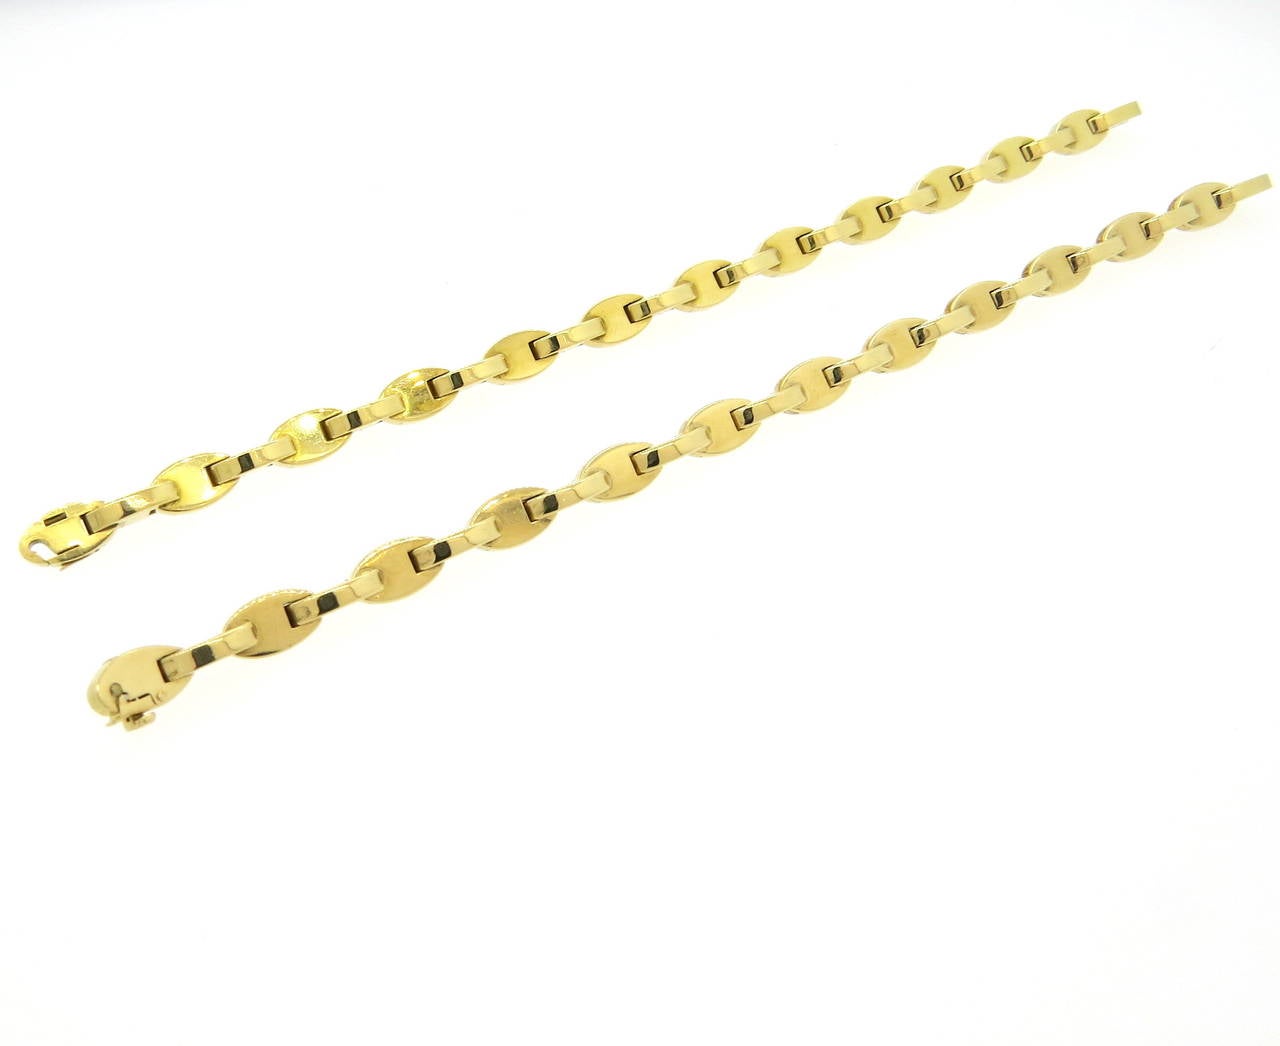 A pair of 18k yellow gold bracelets.  Crafted by Hermes, the bracelets each measure 7